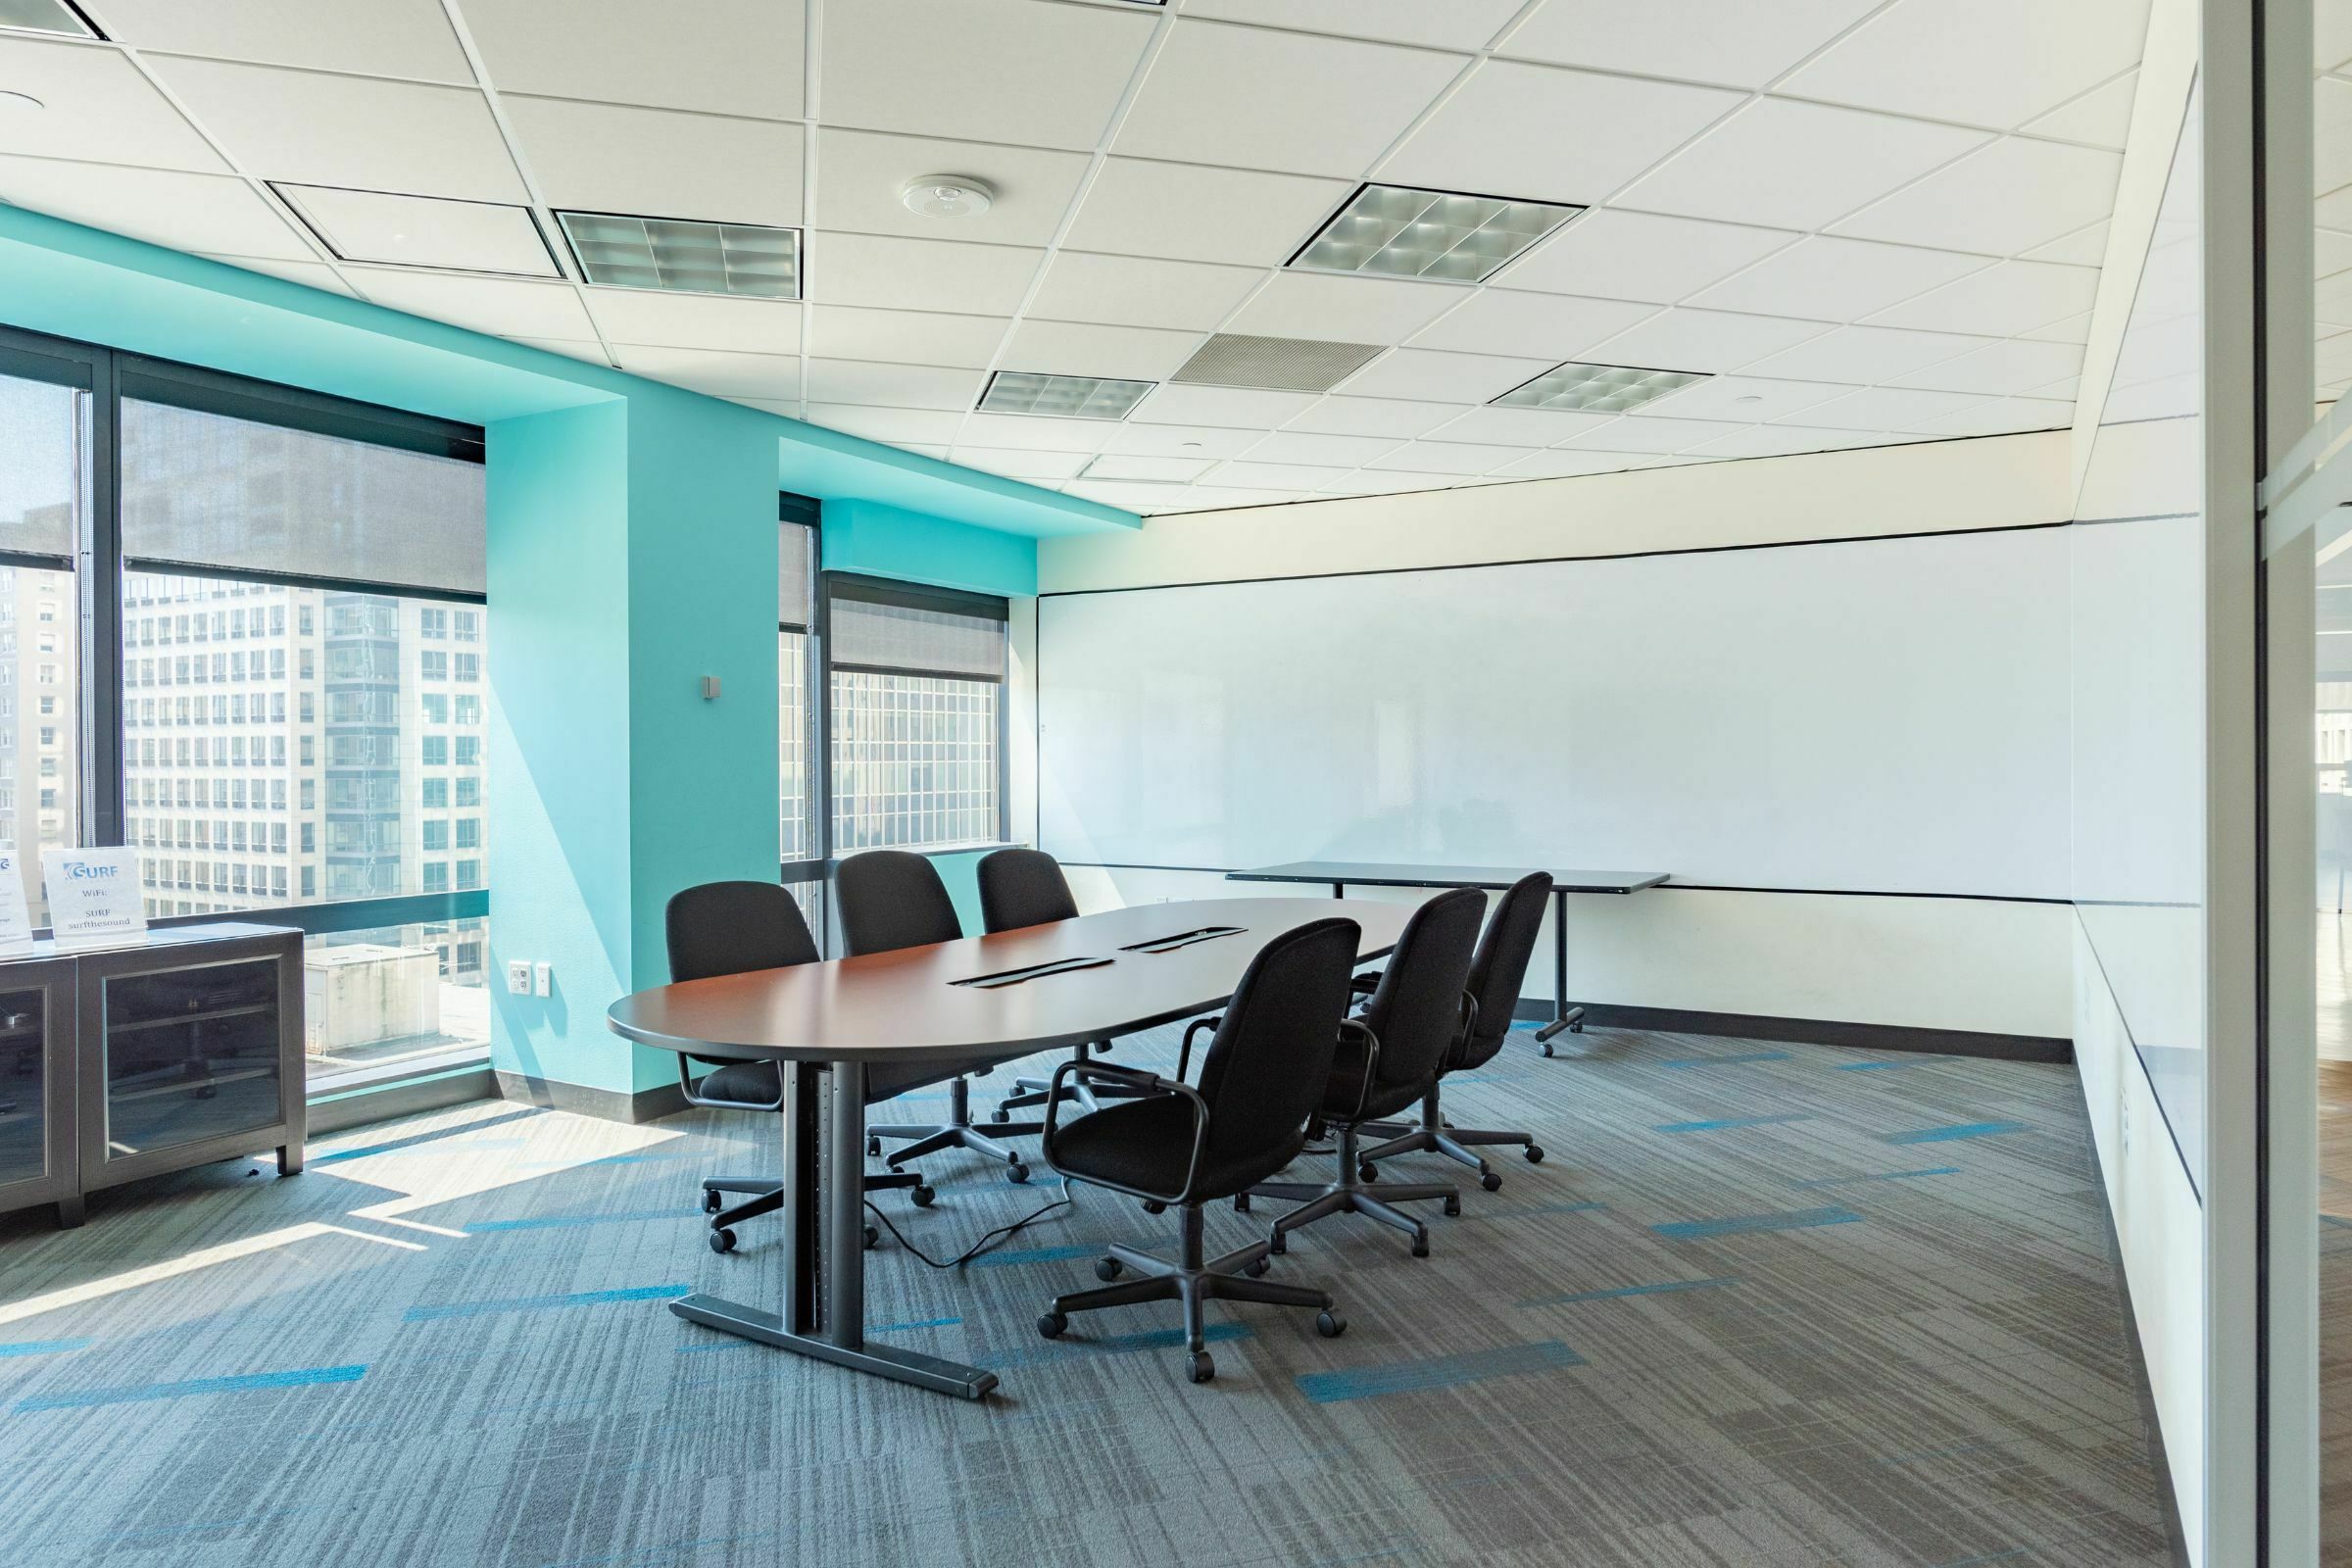 Conference rooms and creative space for events and offices